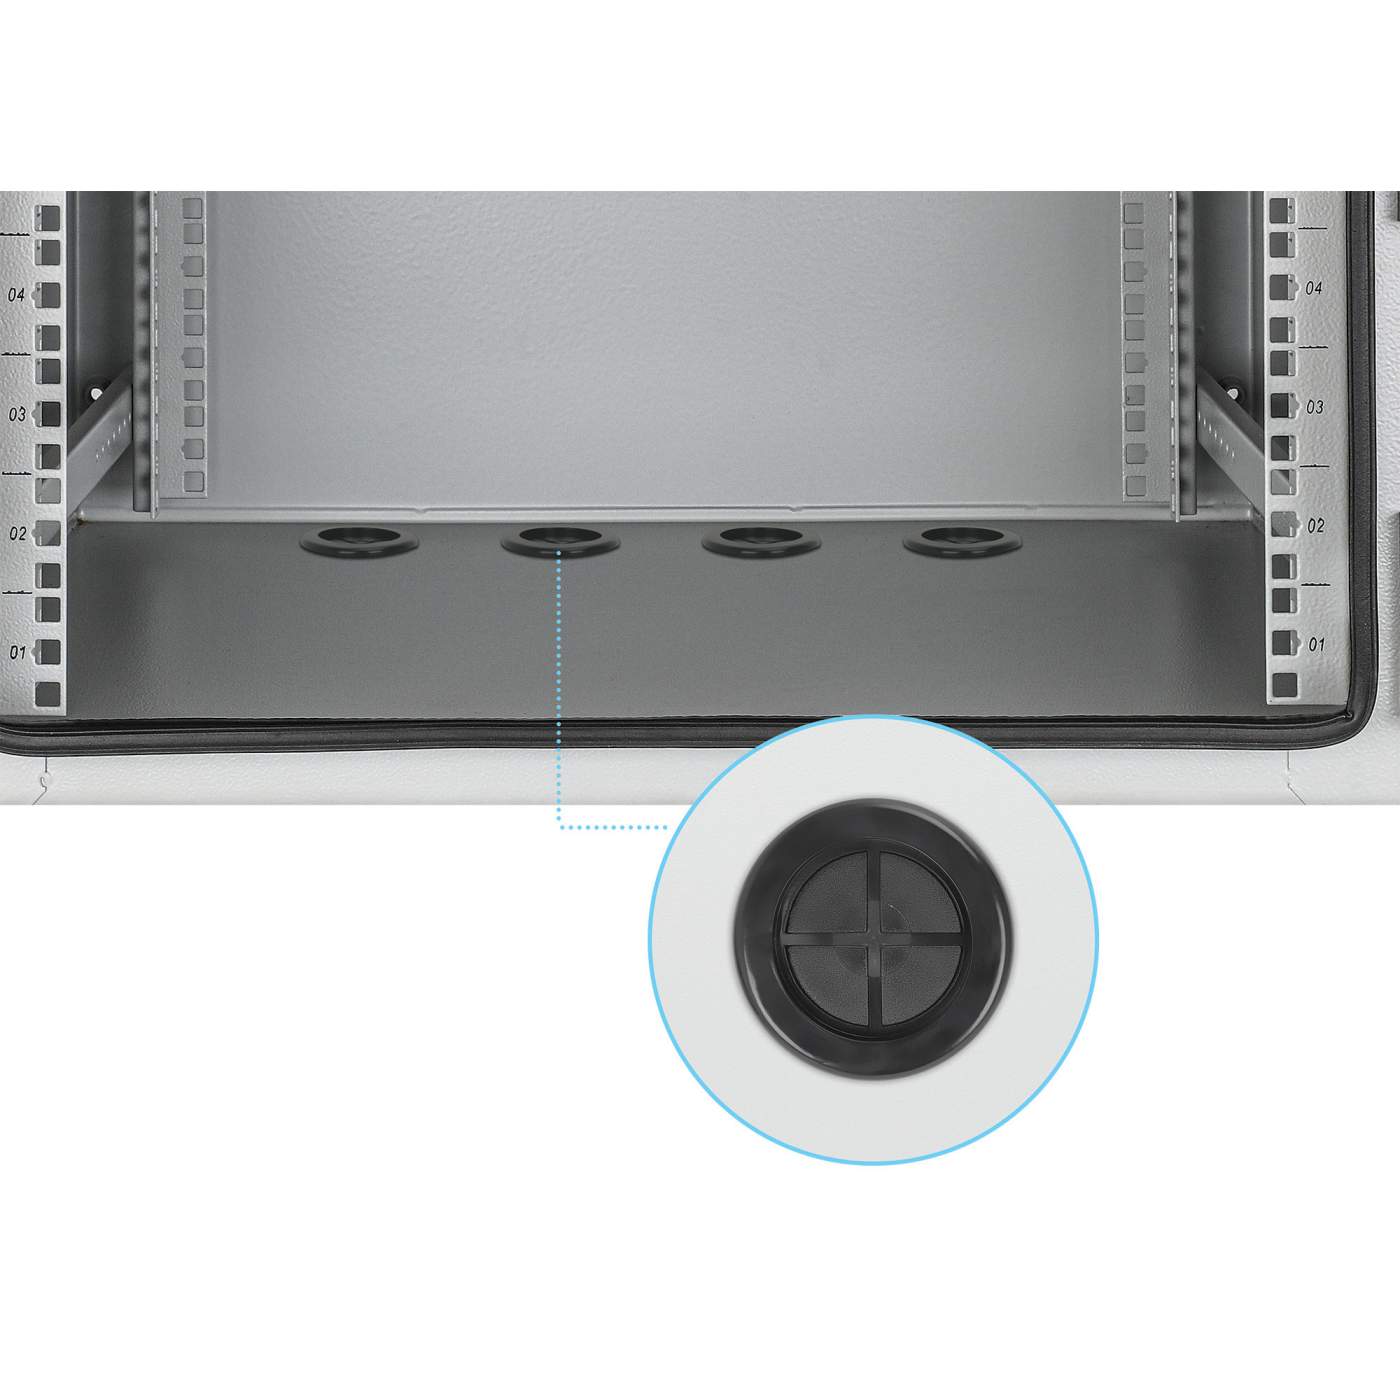 Industrial IP55 19" Wall Mount Cabinet with Integrated Fans, 6U  Image 8